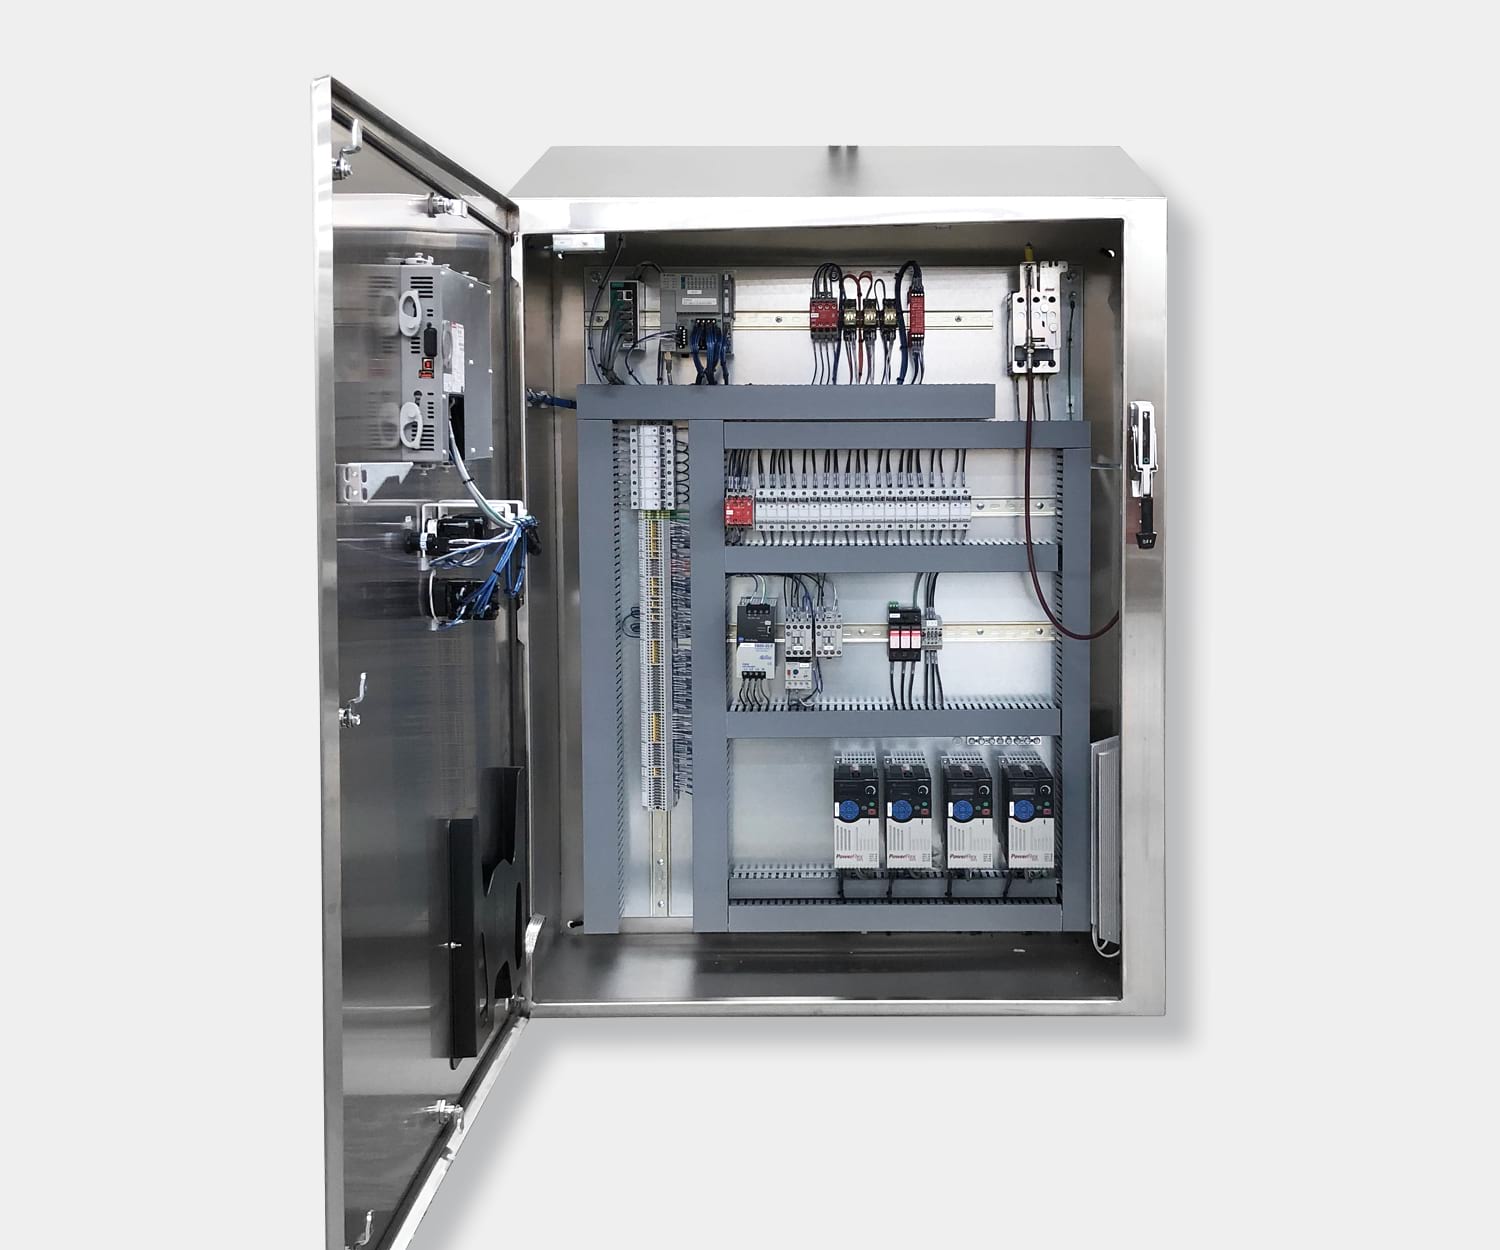 Electrical Control Panel in Stainless Steel Enclosure